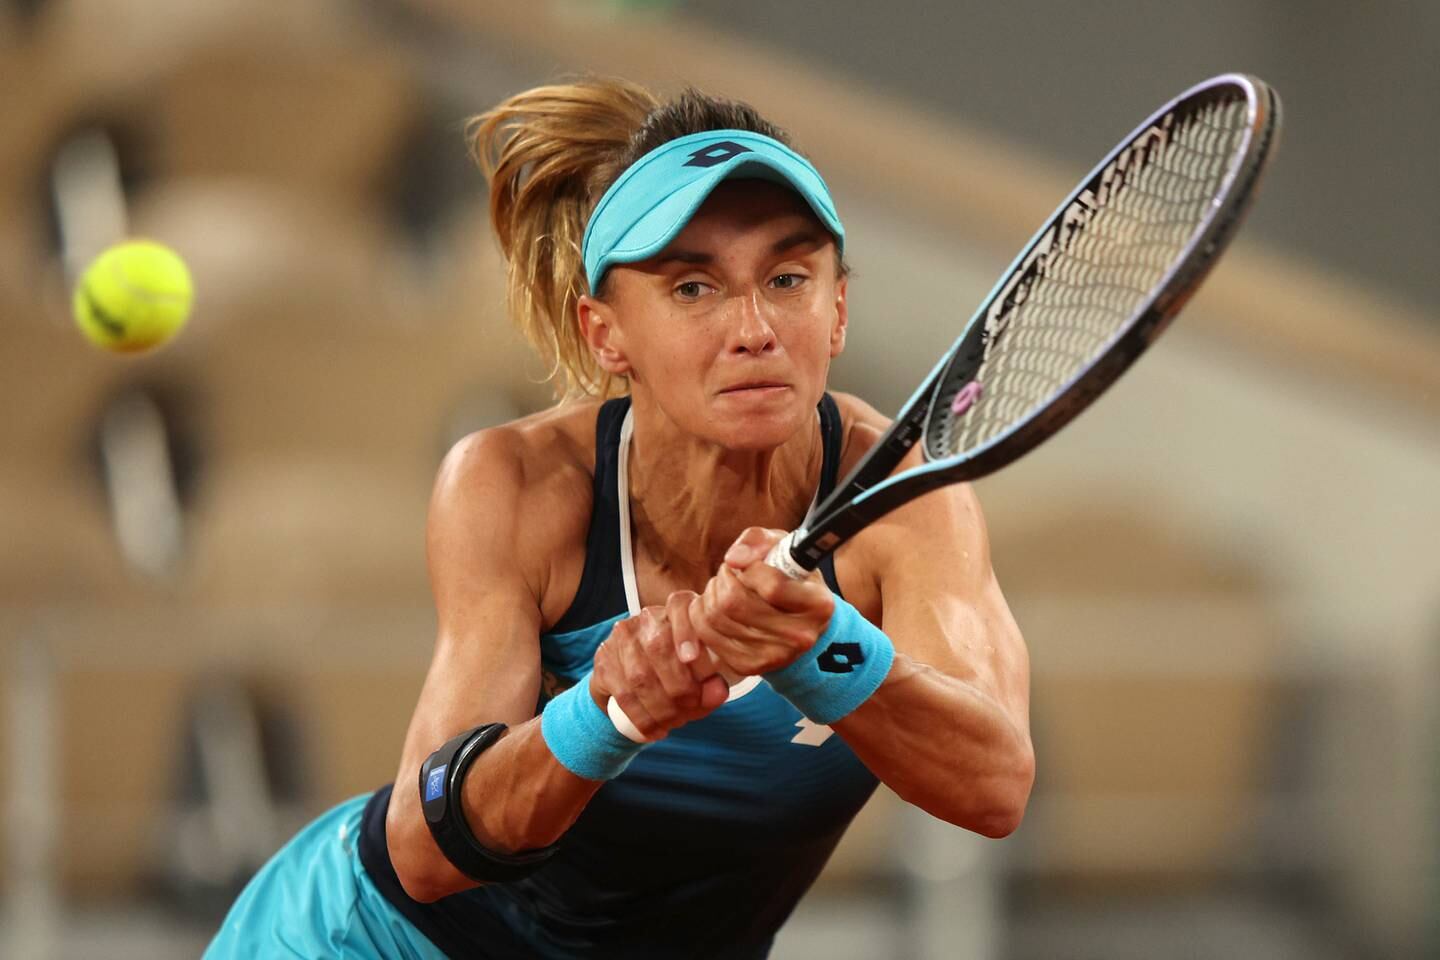 Lesia Tsurenko criticised players for their lack of support regarding the war in Ukraine. Getty